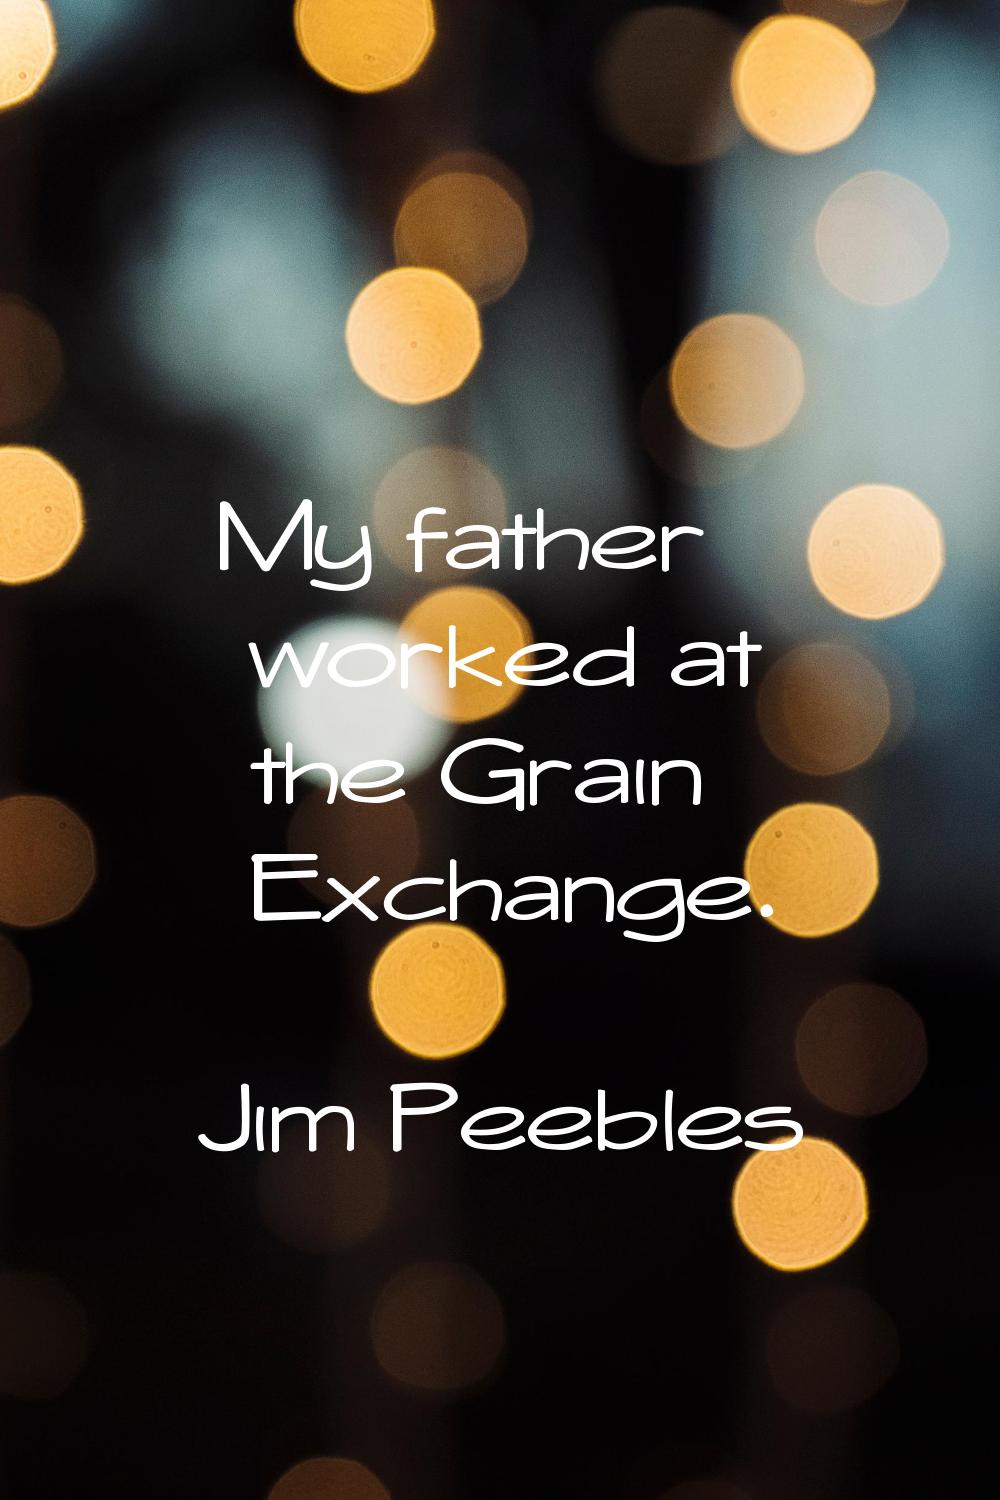 My father worked at the Grain Exchange.